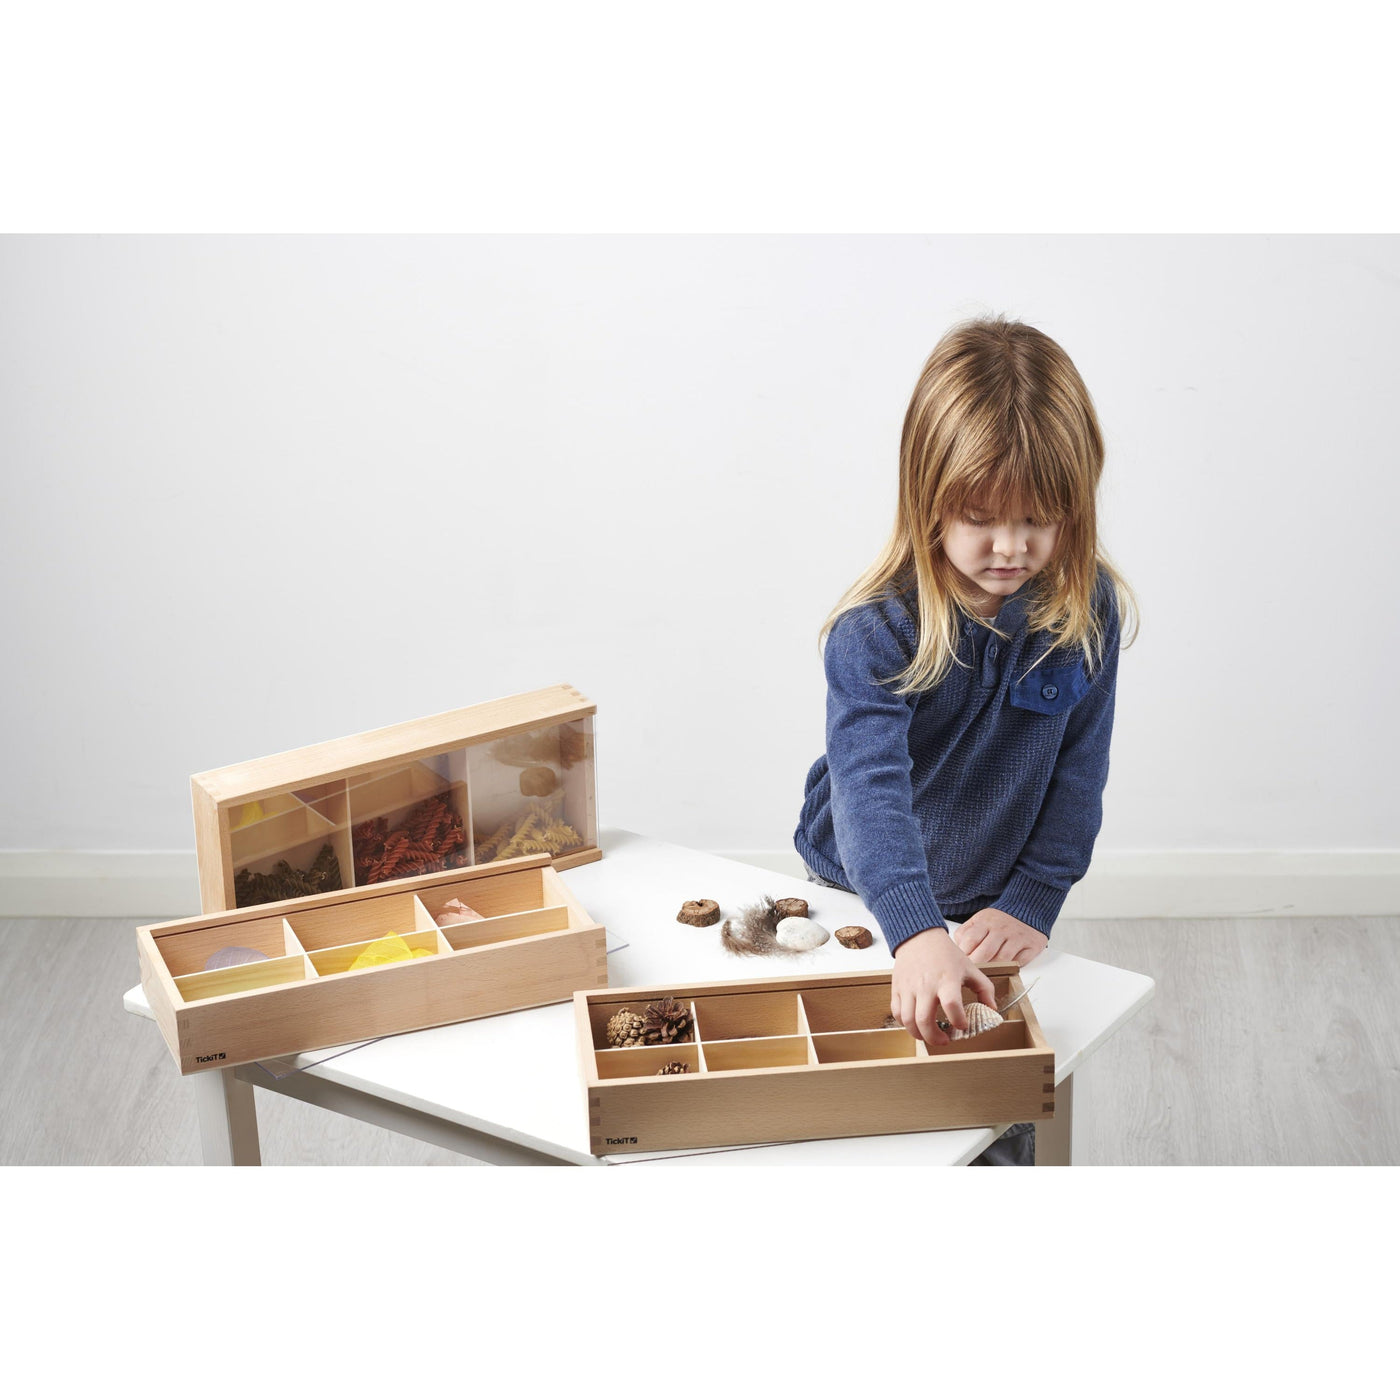 TickiT Wooden Discovery Boxes - Set of 3